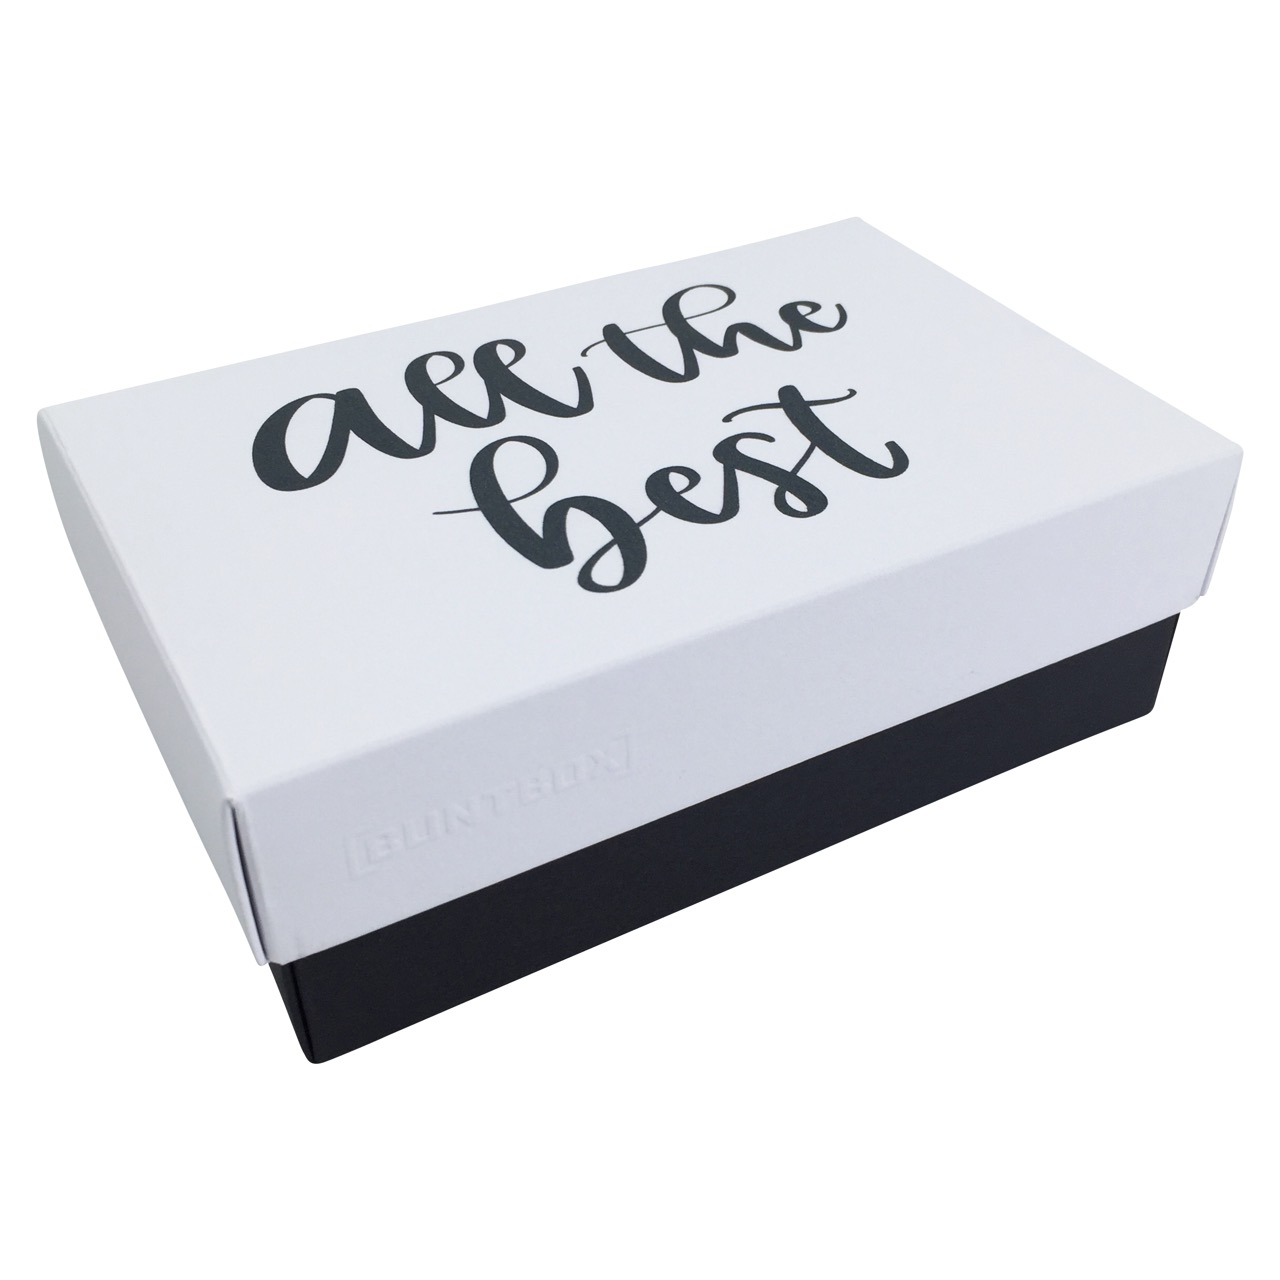 Buntbox M Lettering all the best in Diamant-Graphit